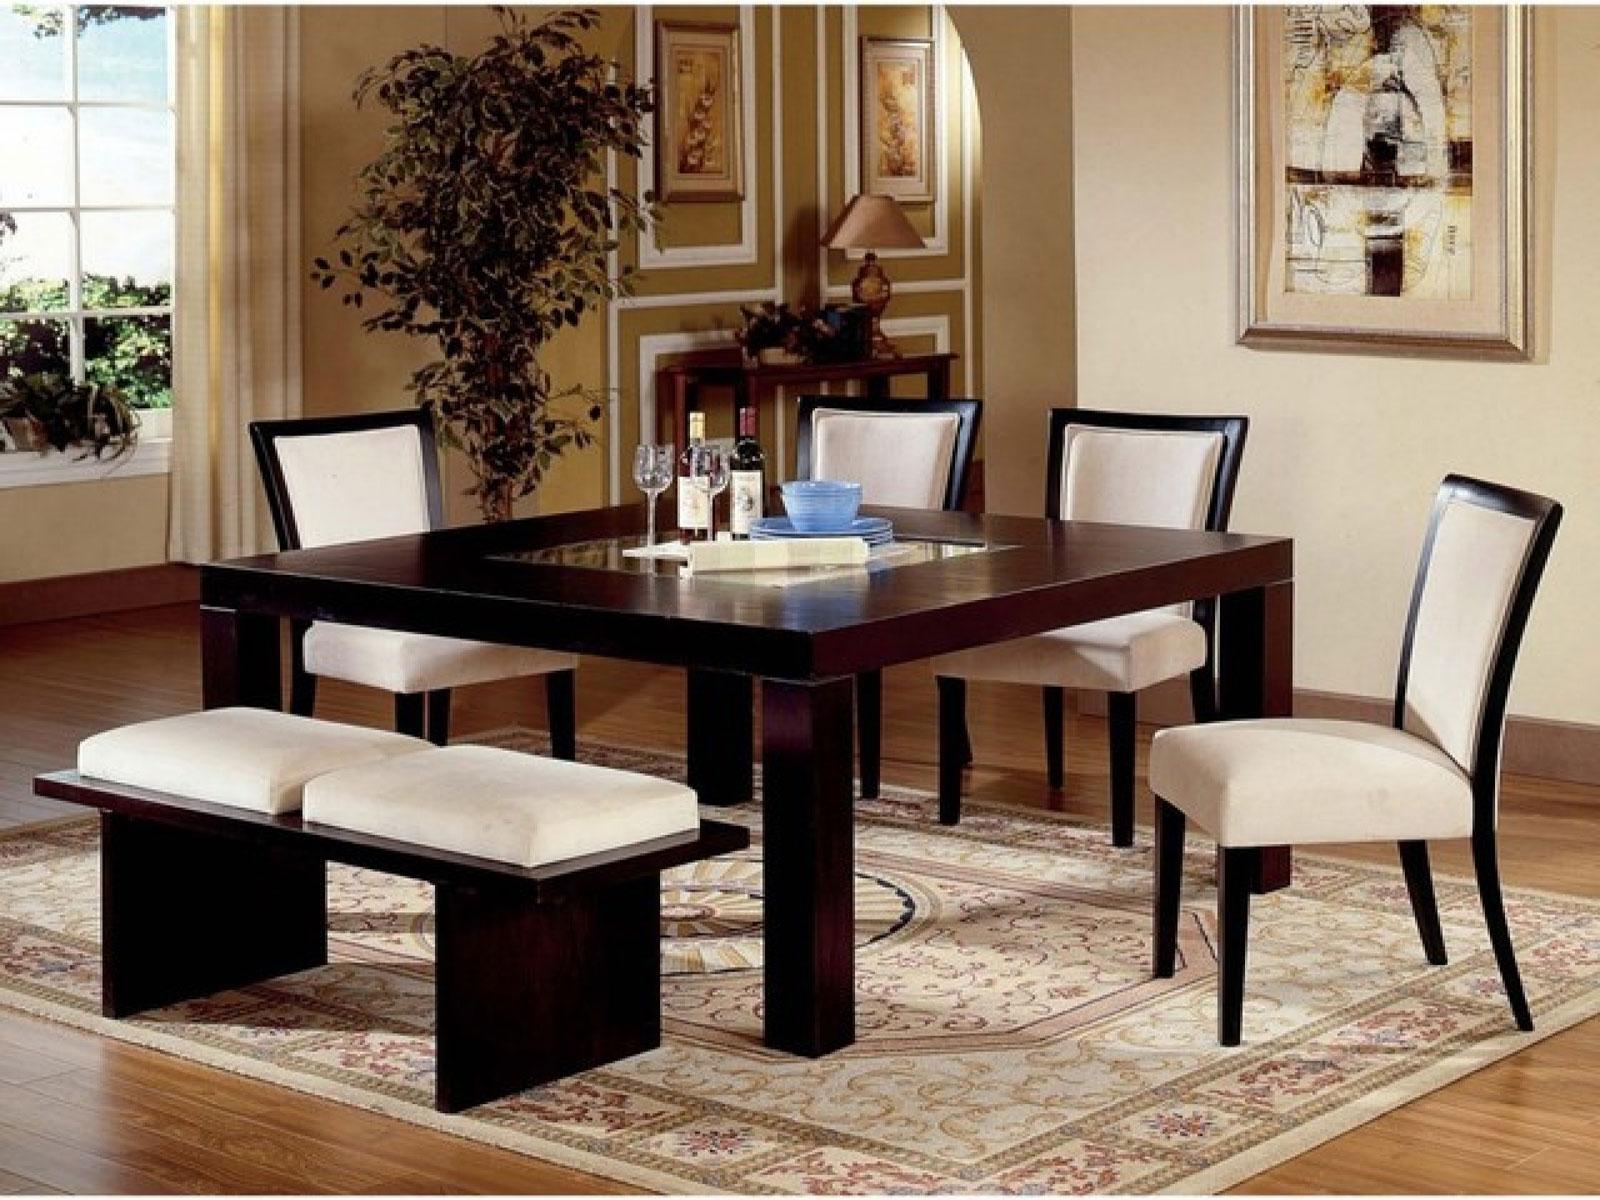 Contemporary Dining Applying Captivating Contemporary Dining Room Sets Applying White And Black Furniture Color Of Chairs Also Bench And Table On Rug And Furnished With Beverages Dining Room The Design Contemporary Dining Room Sets